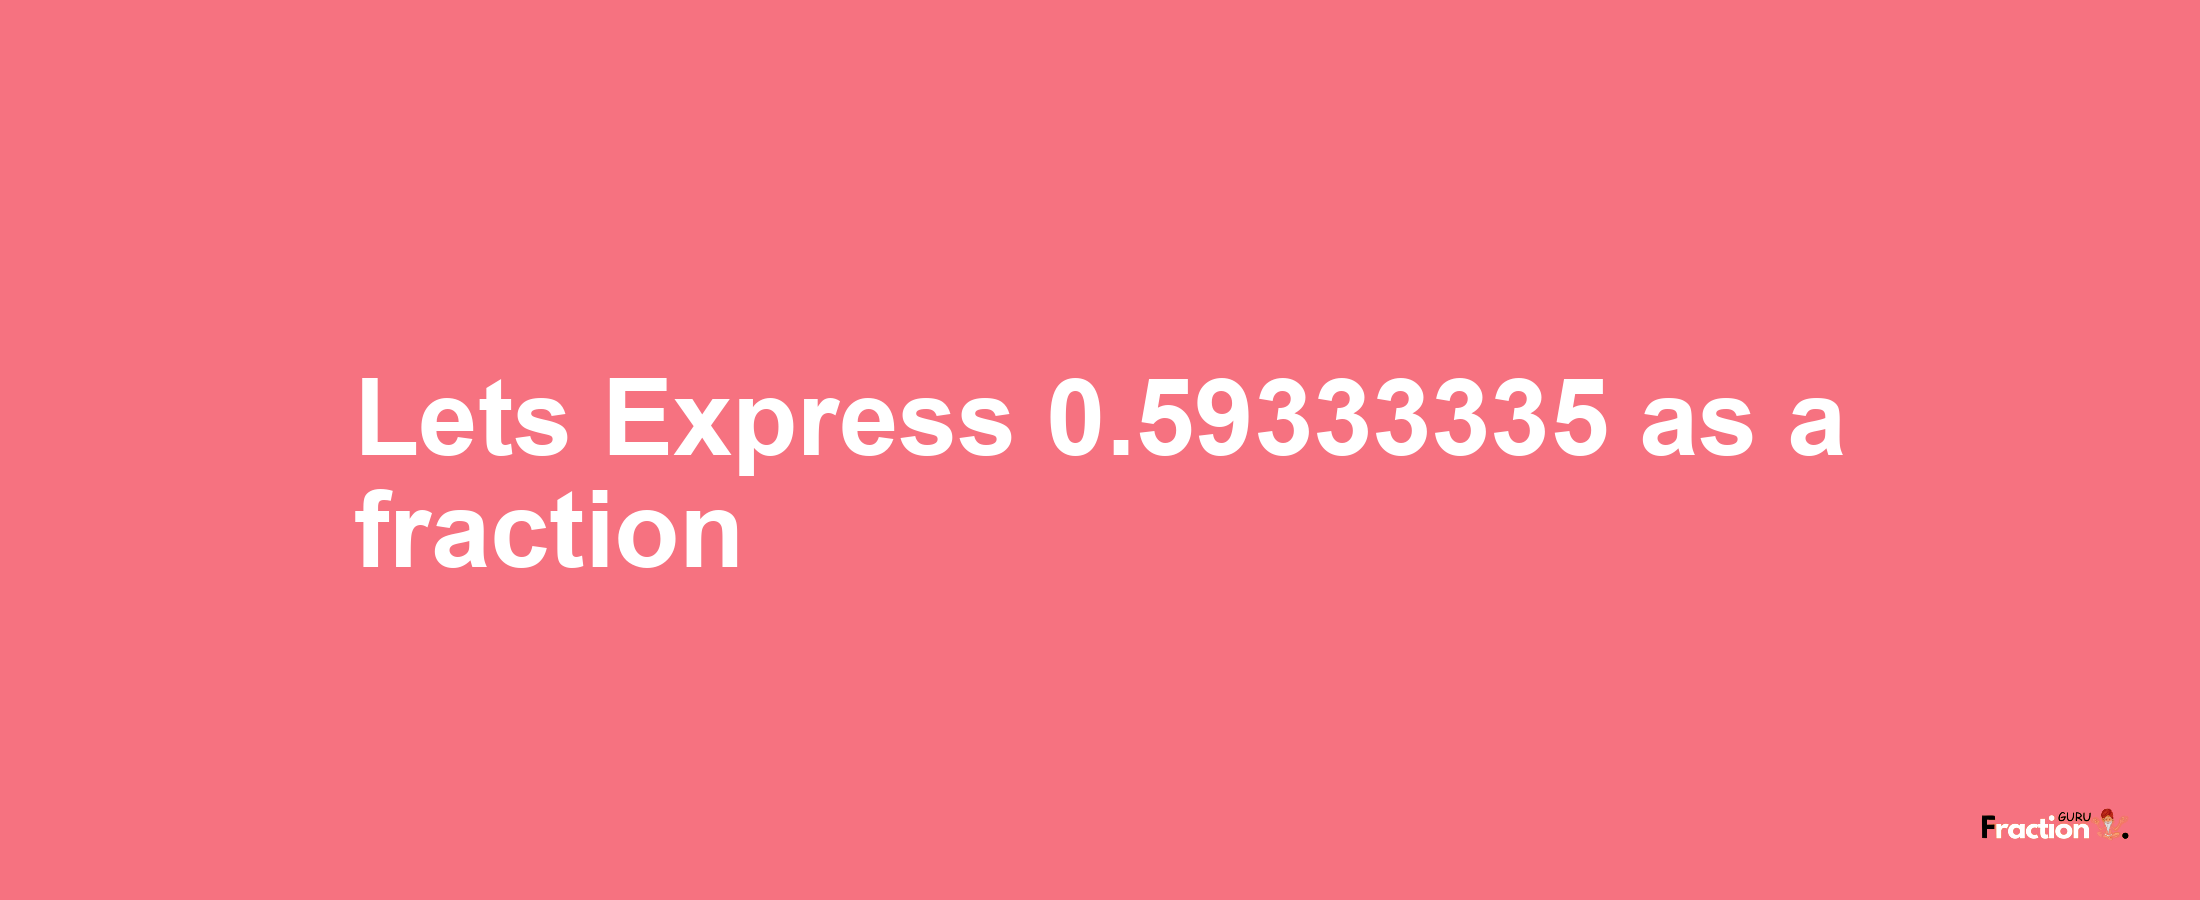 Lets Express 0.59333335 as afraction